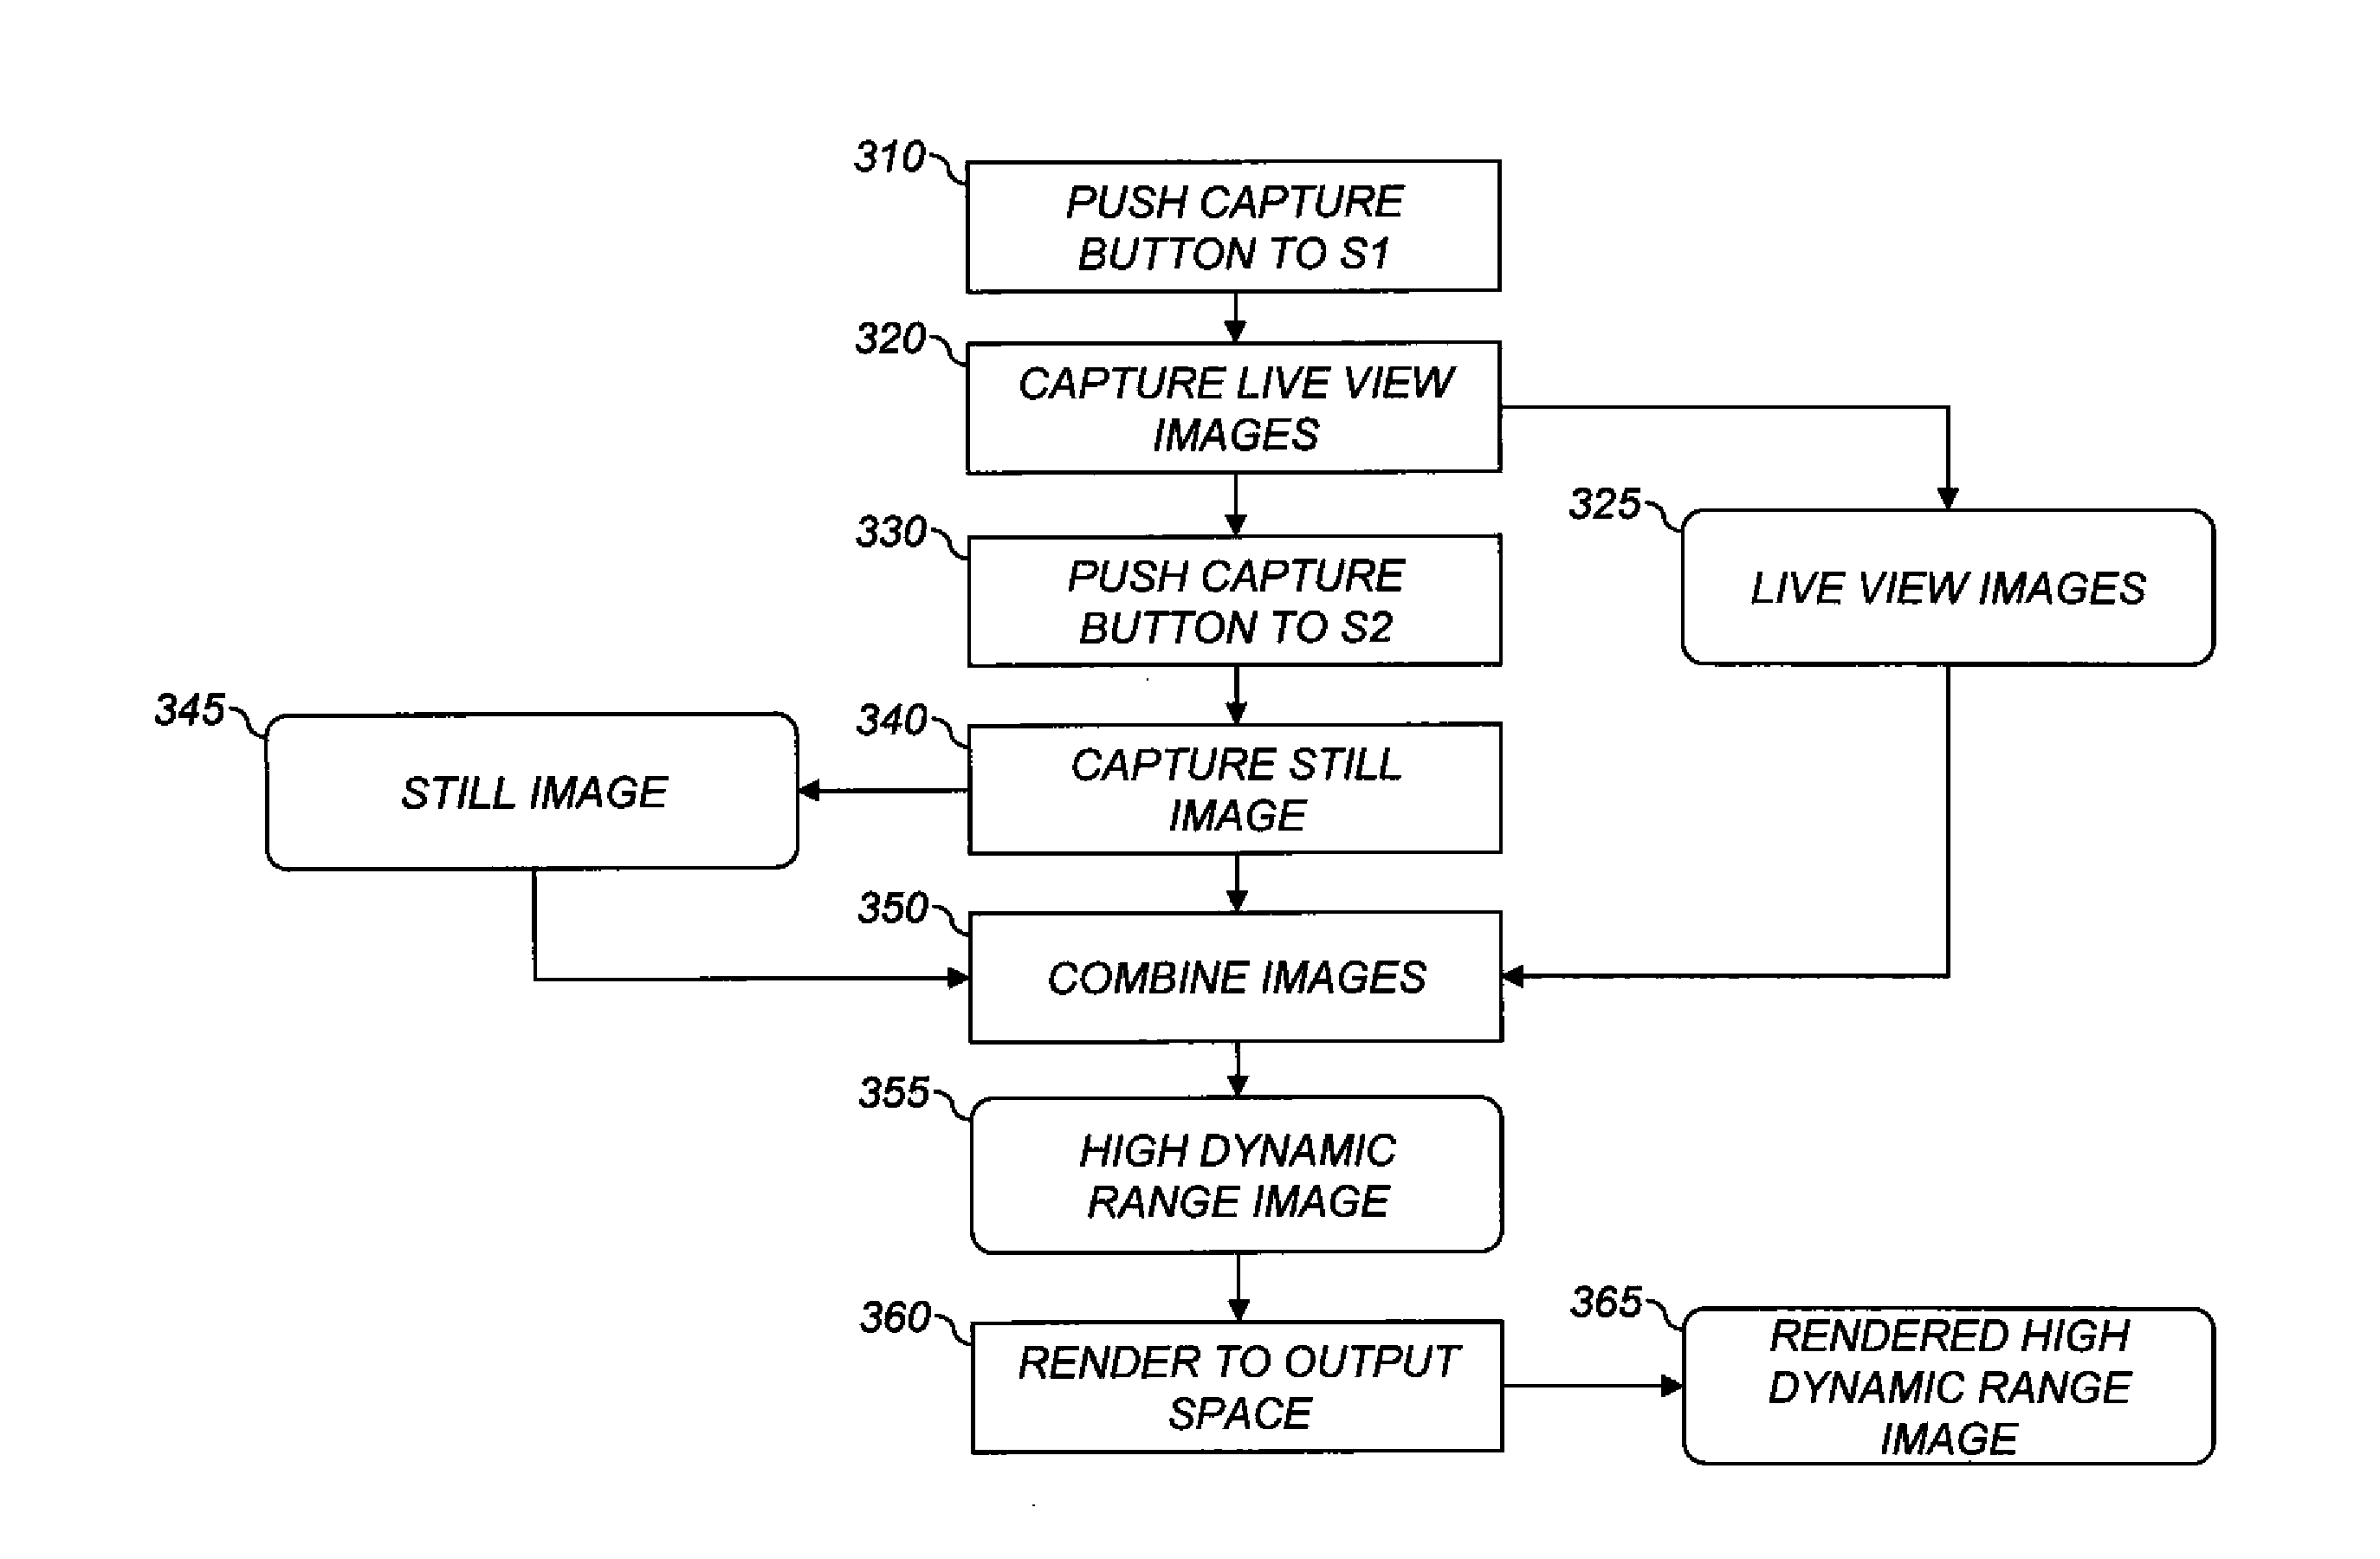 Method for producing high dynamic range images